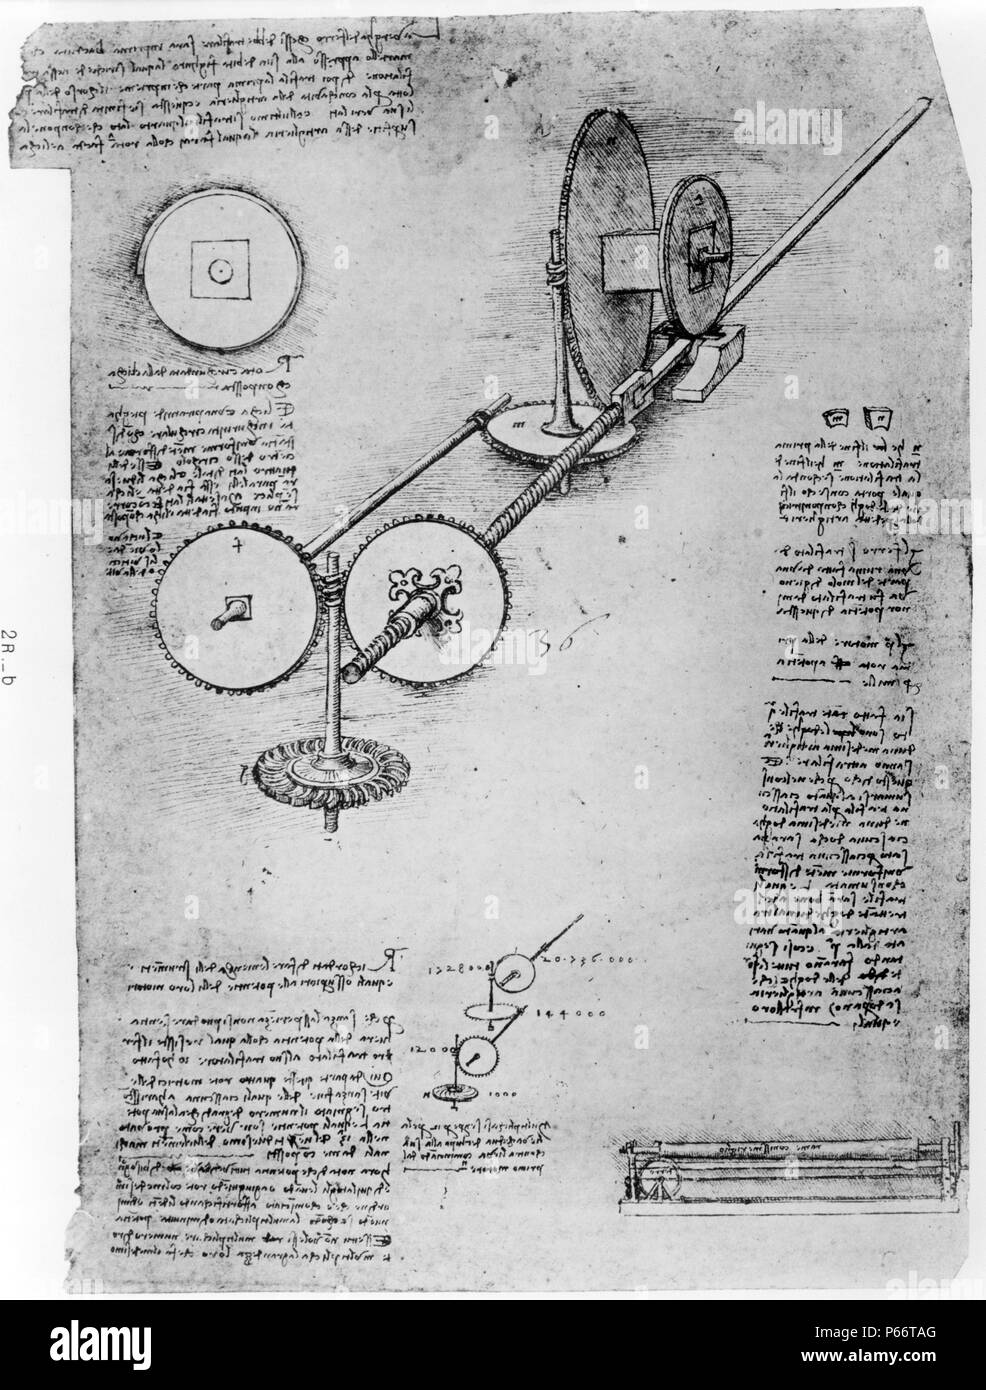 Reproduction of page from notebook showing the operation of a mechanical wing by Leonardo, da Vinci, 1452-1519. Dated between 1894 and 1904 Stock Photo